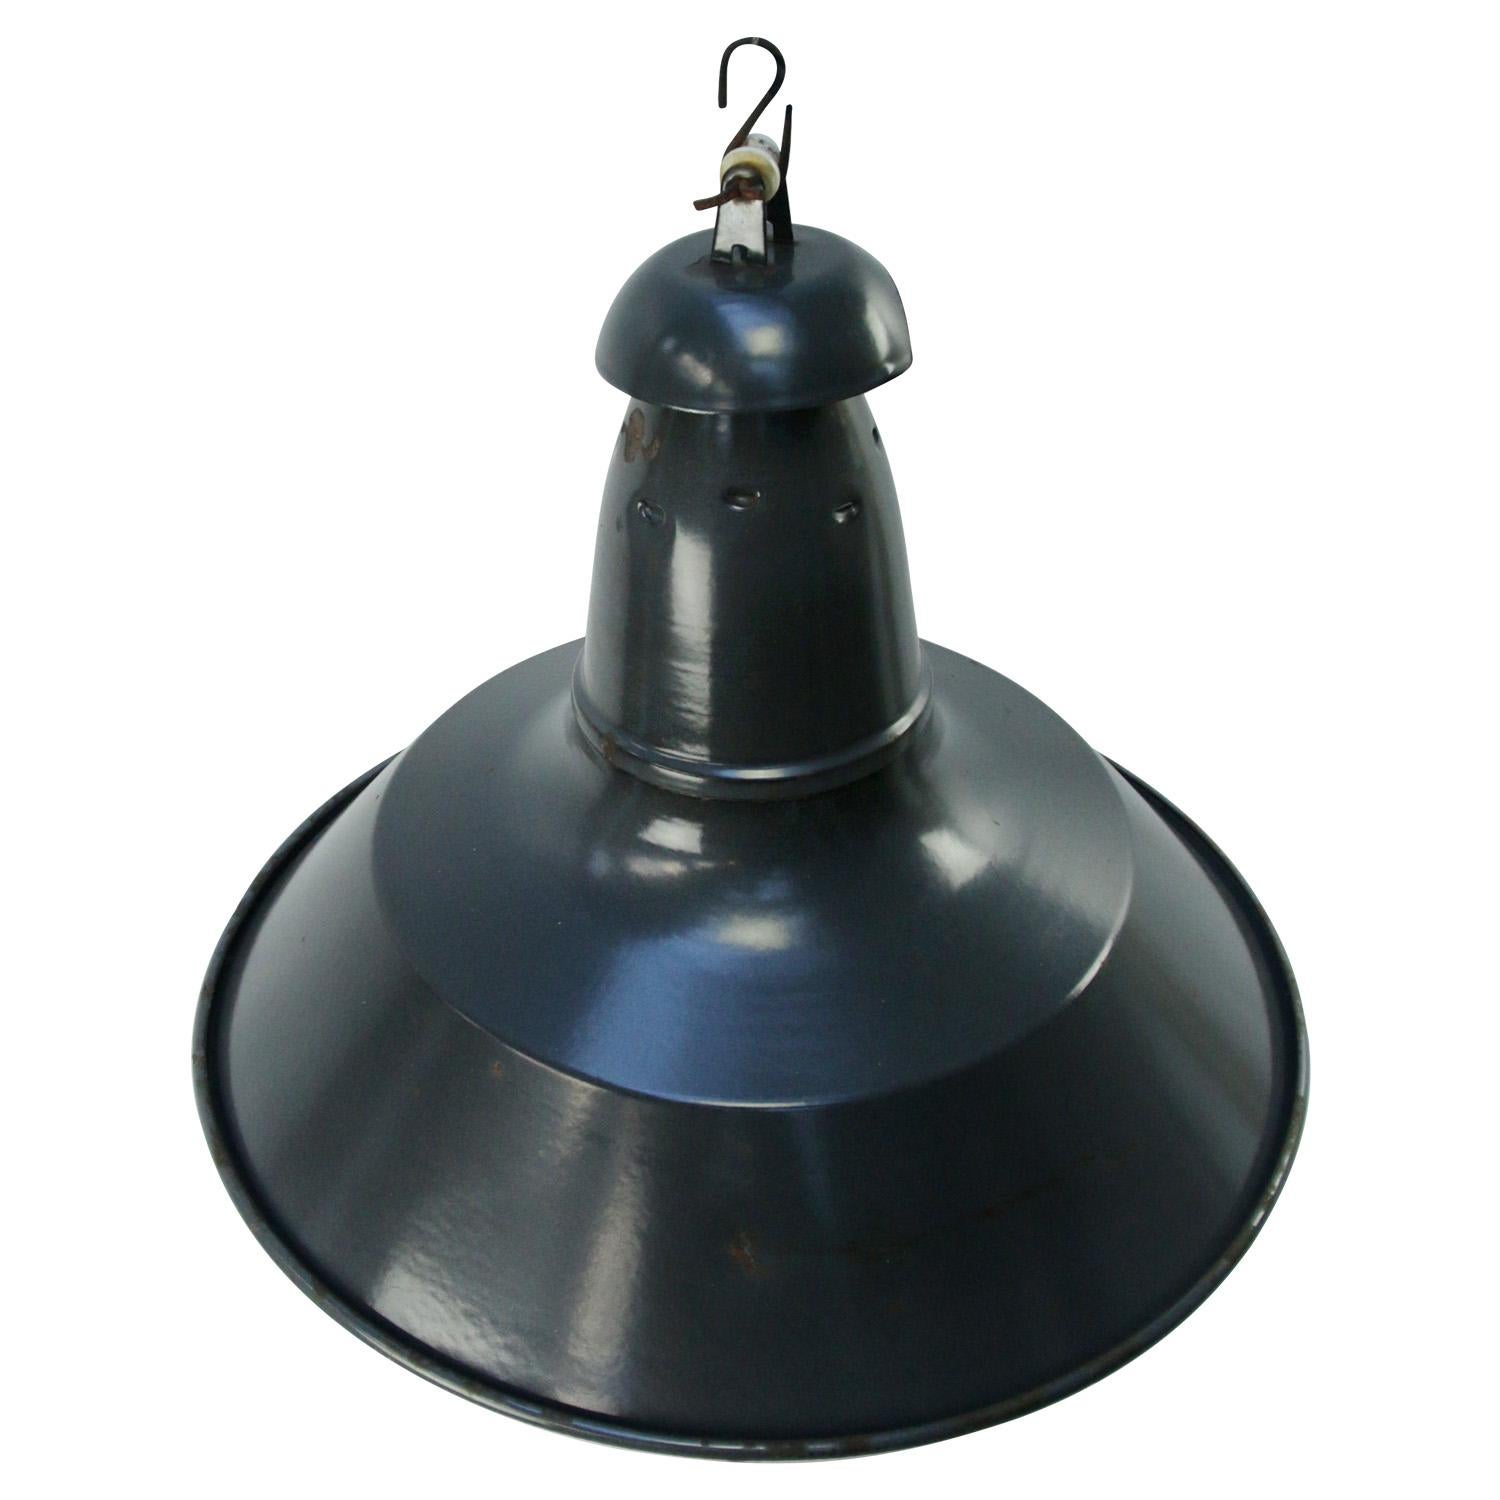 French blue black Industrial pendant lamp.
Used in warehouses and factories in France and Belgium. 

Weight: 1.60 kg / 3.5 lb

Priced per individual item. All lamps have been made suitable by international standards for incandescent light